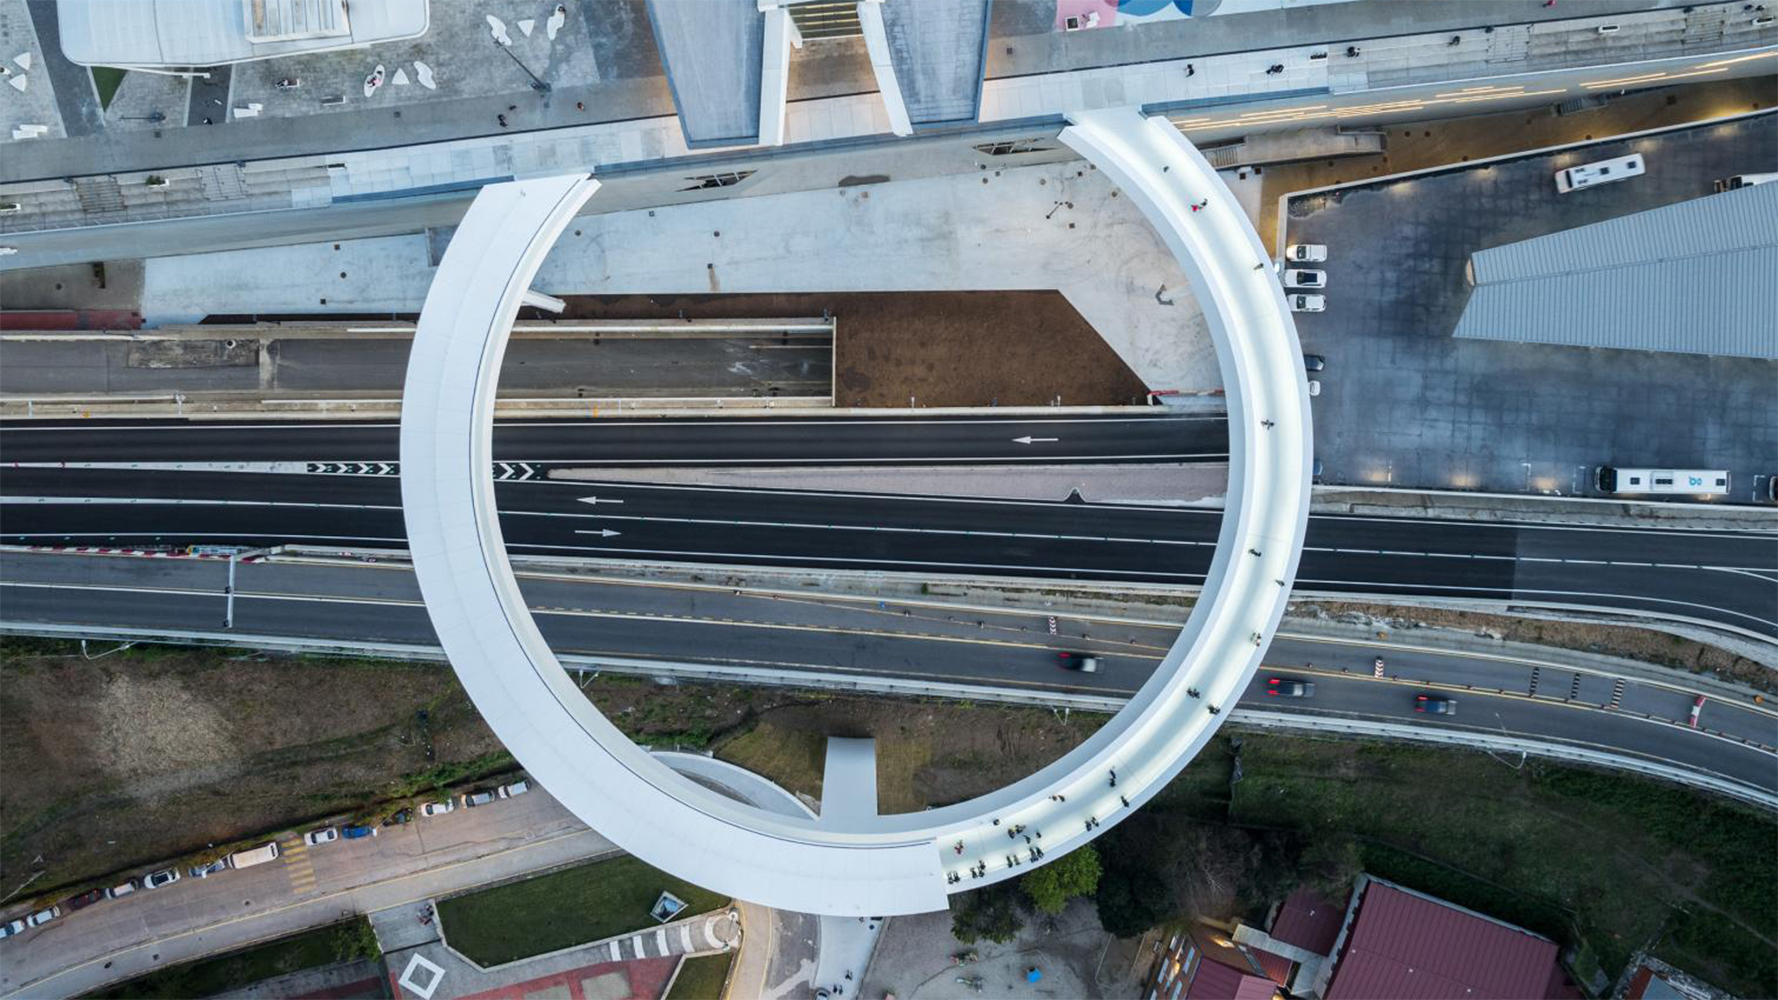 Snapshot: 'Halo' Elevates and Connects Pedestrians in a Hilly Port City